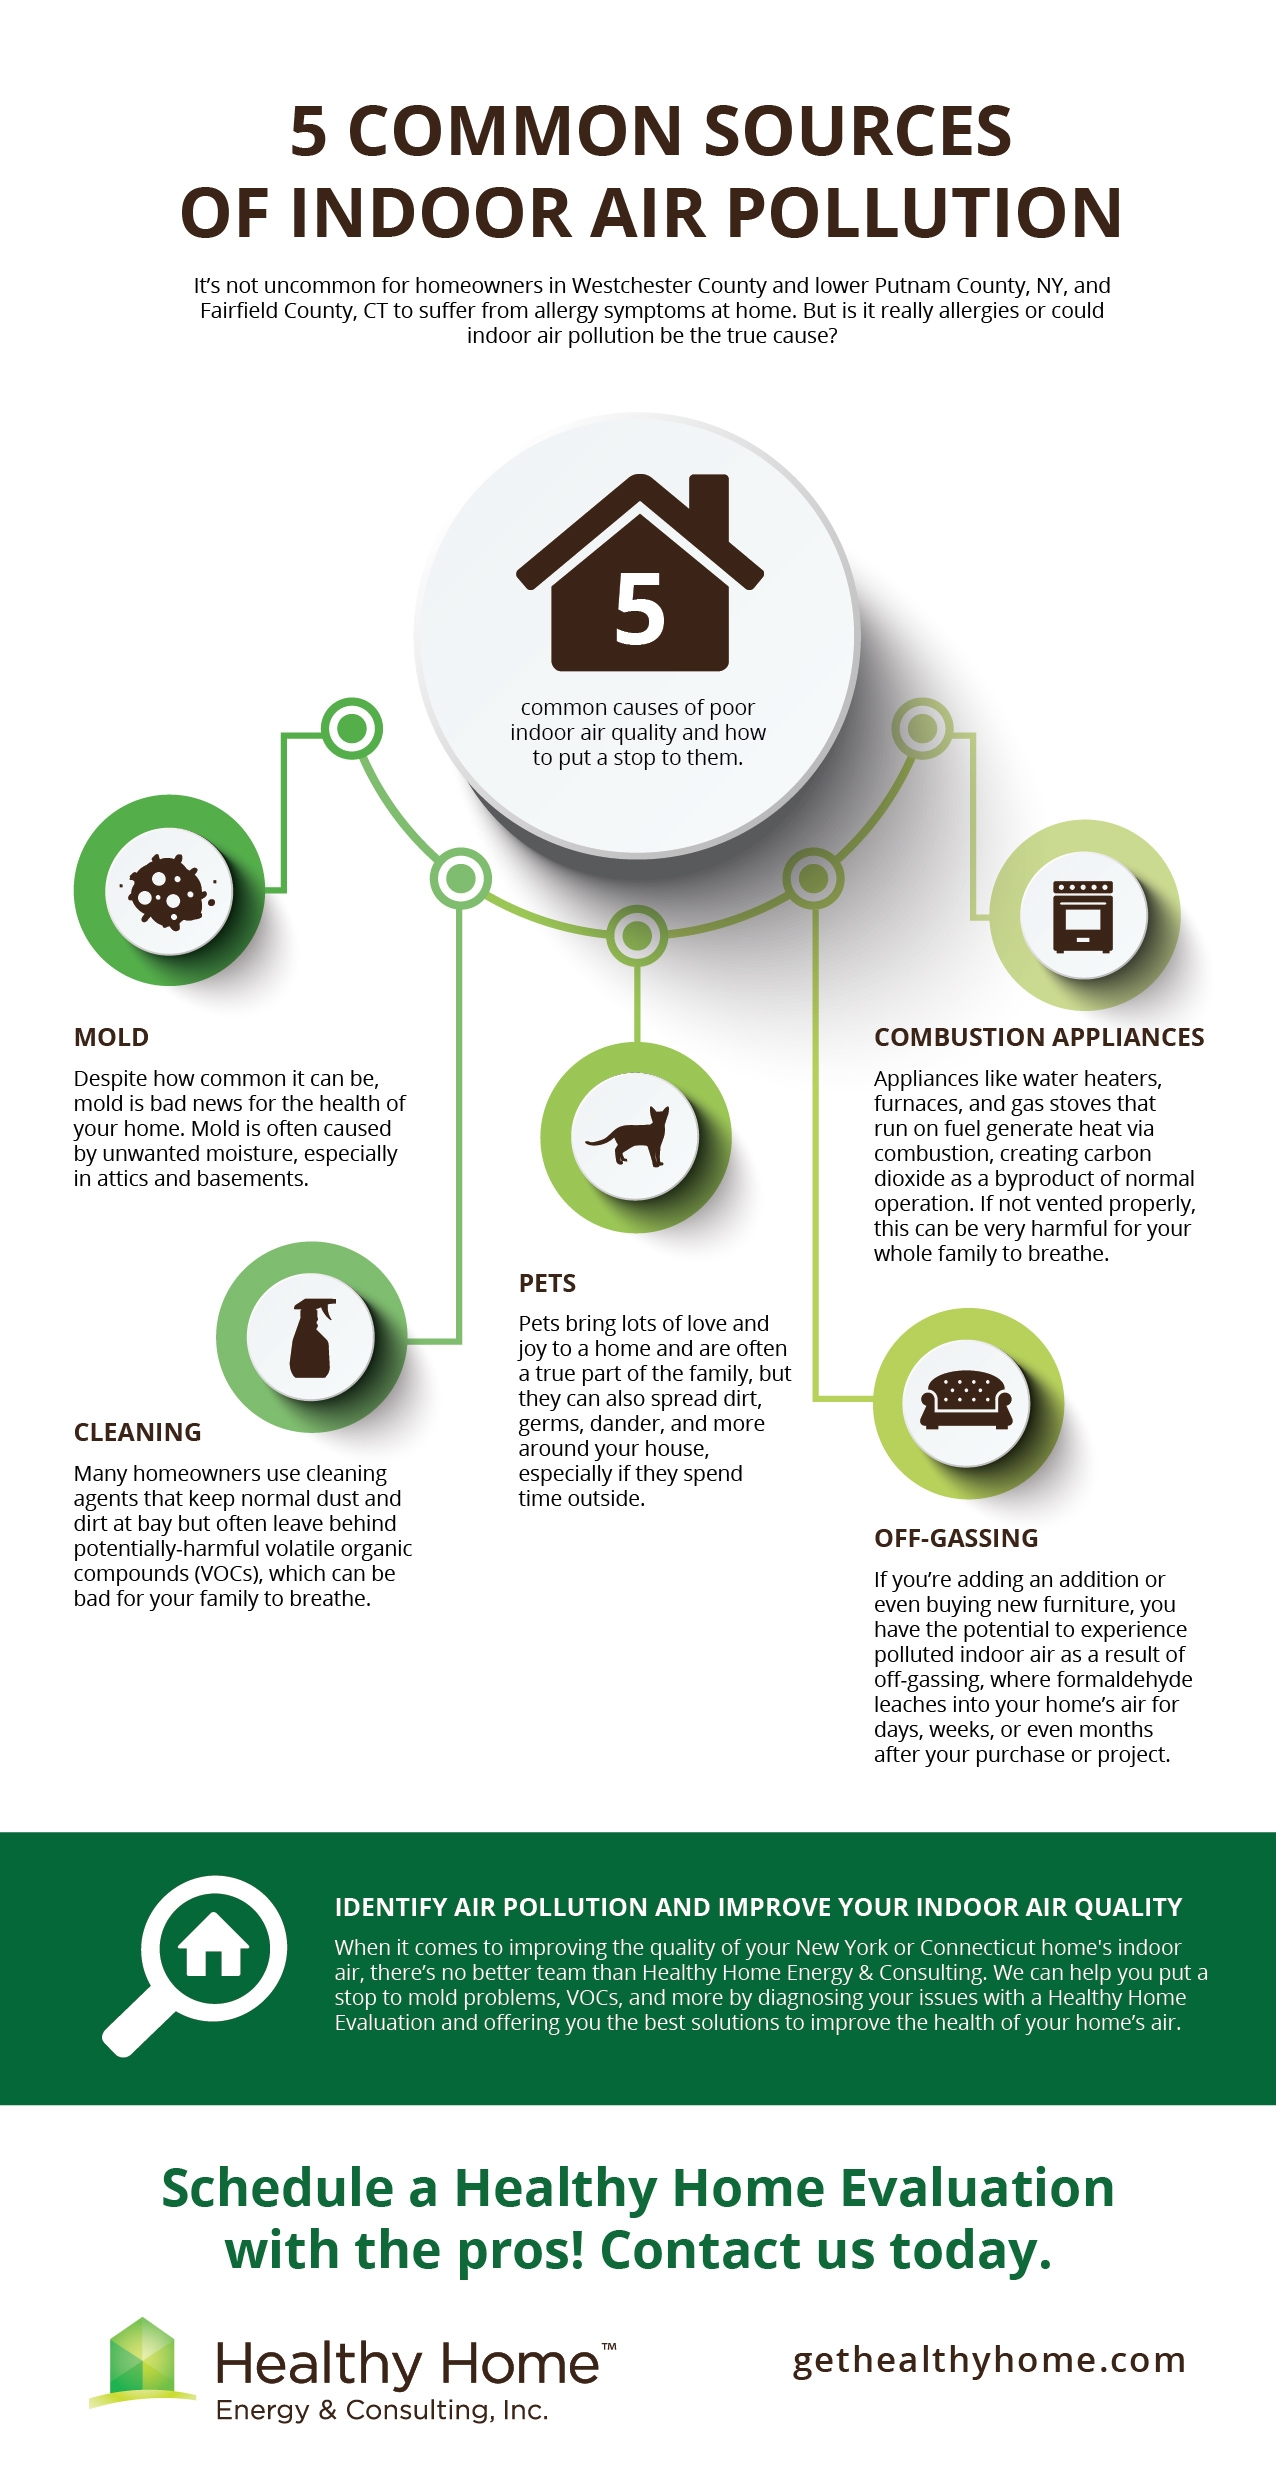 5 Common Sources of Indoor Air Pollution infographic 